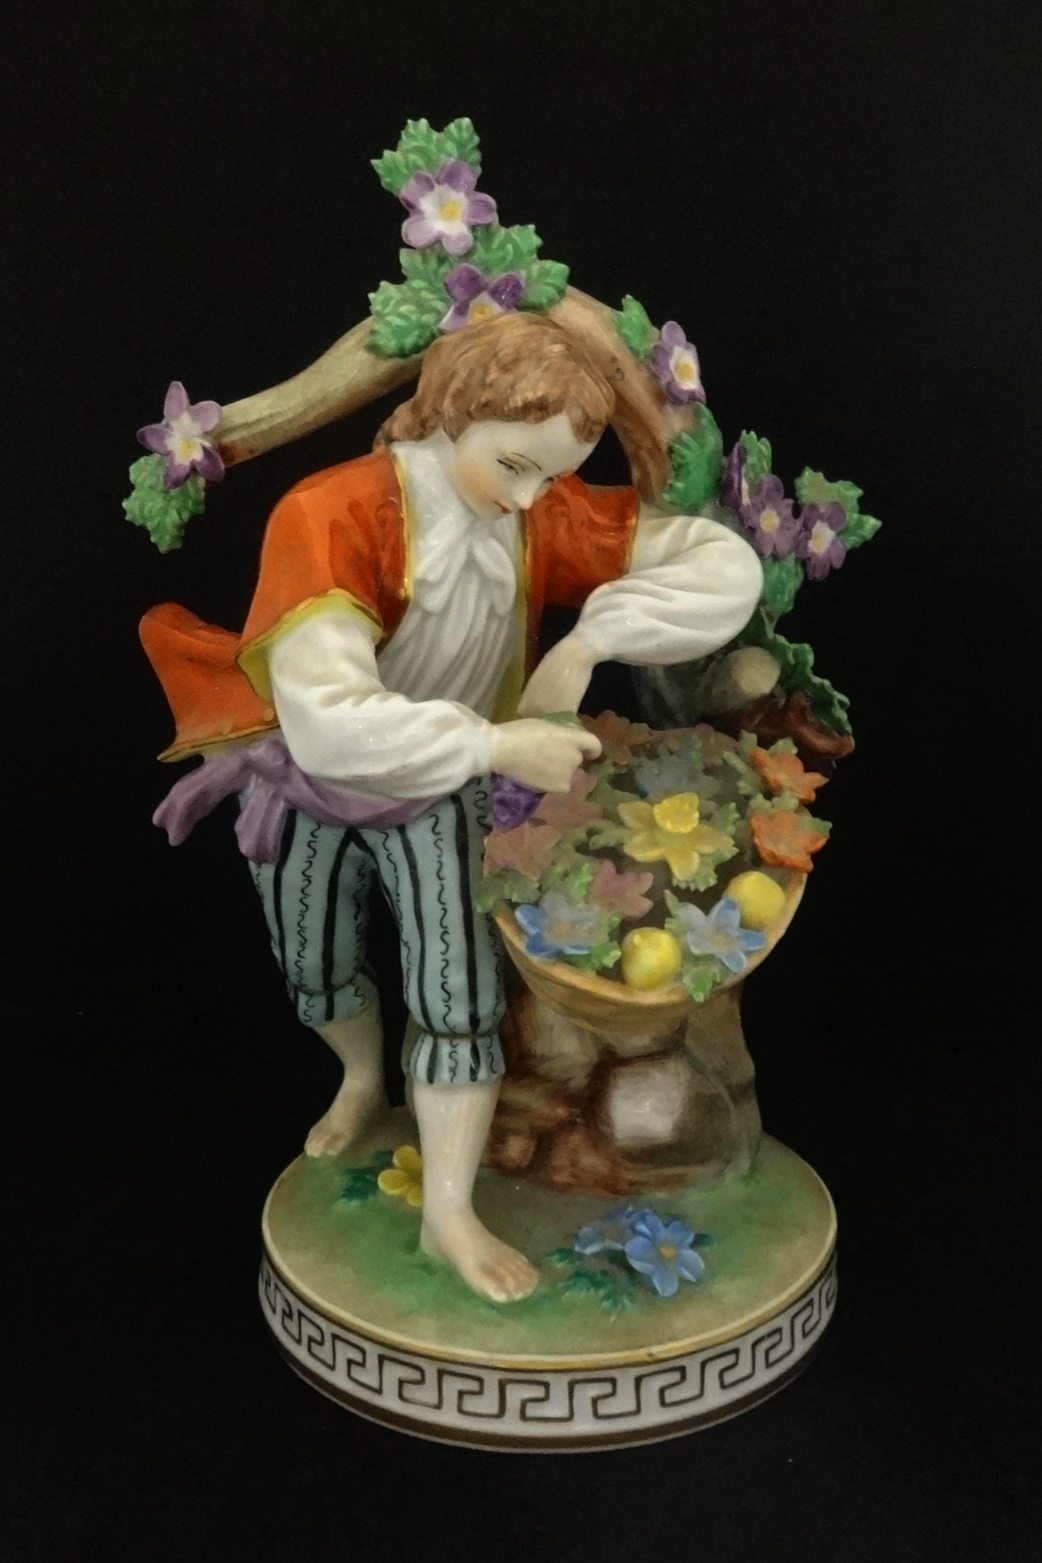 Dresden, an early 20th century porcelain figure in period costume before a tree picking wild